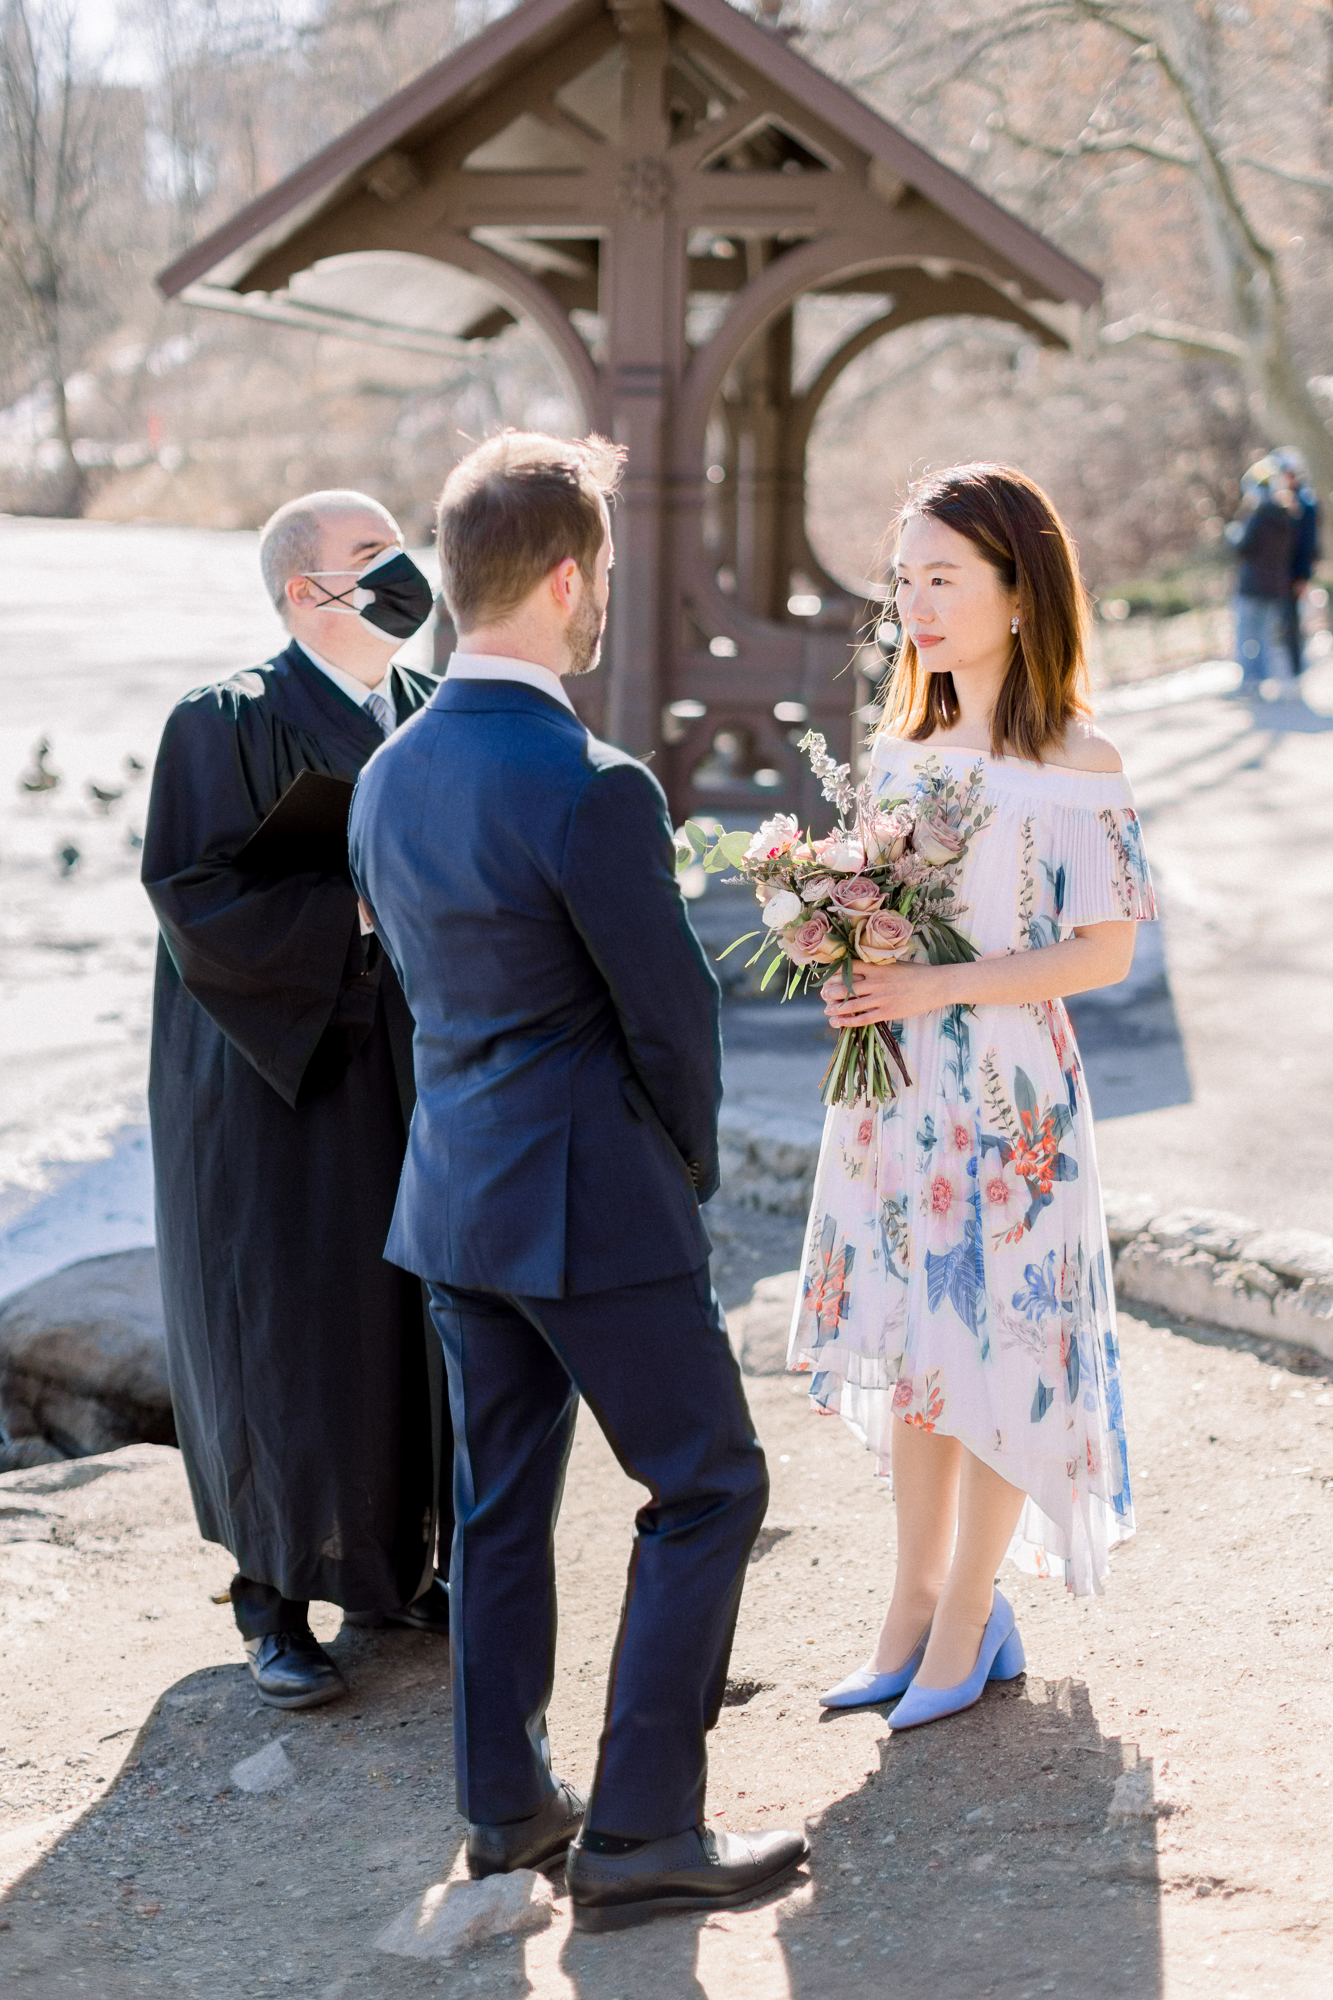 Aesthetic Central Park Wedding Photos in Wintery NYC